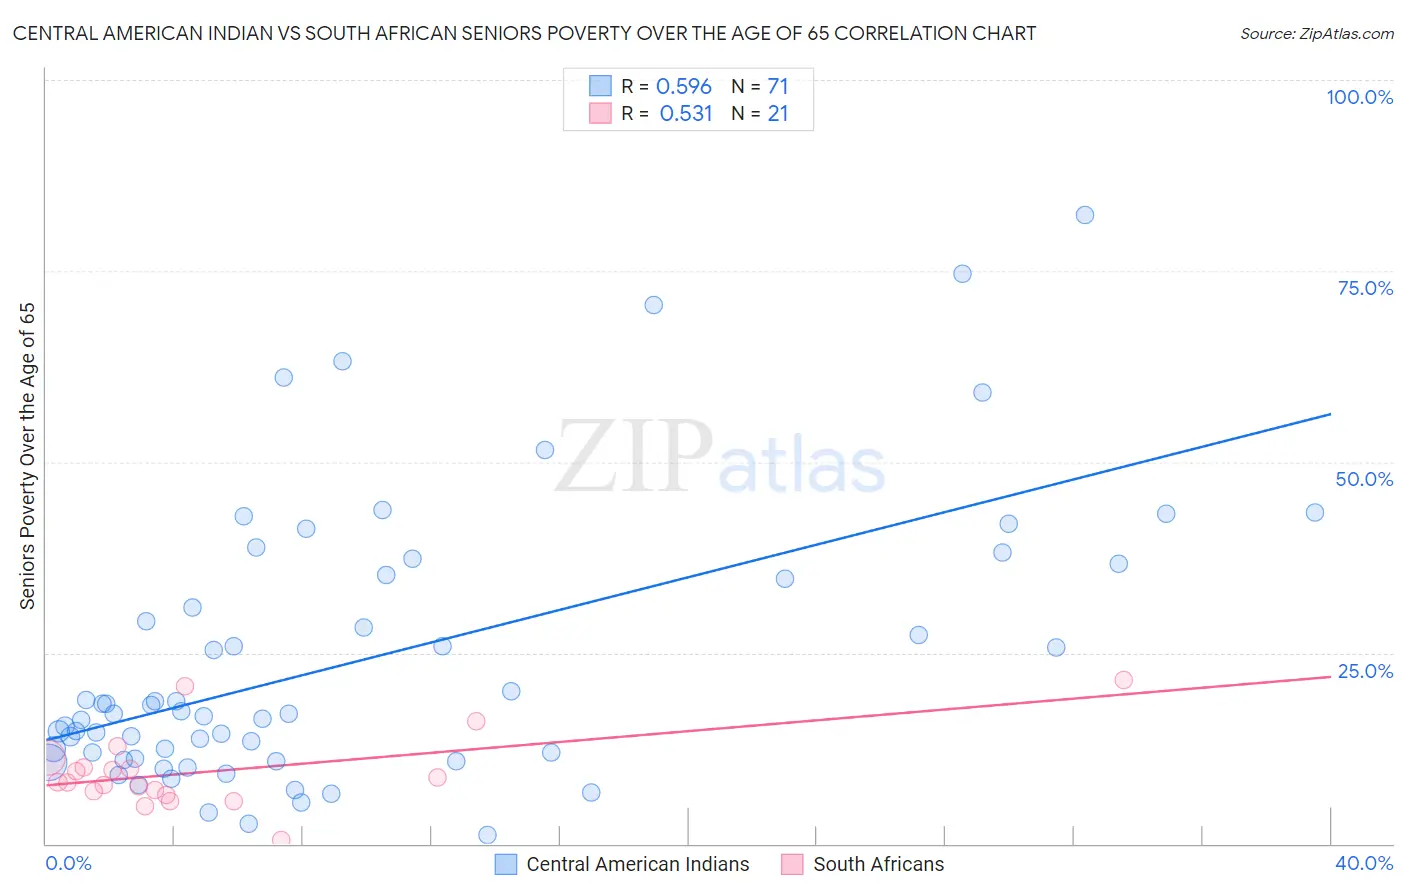 Central American Indian vs South African Seniors Poverty Over the Age of 65